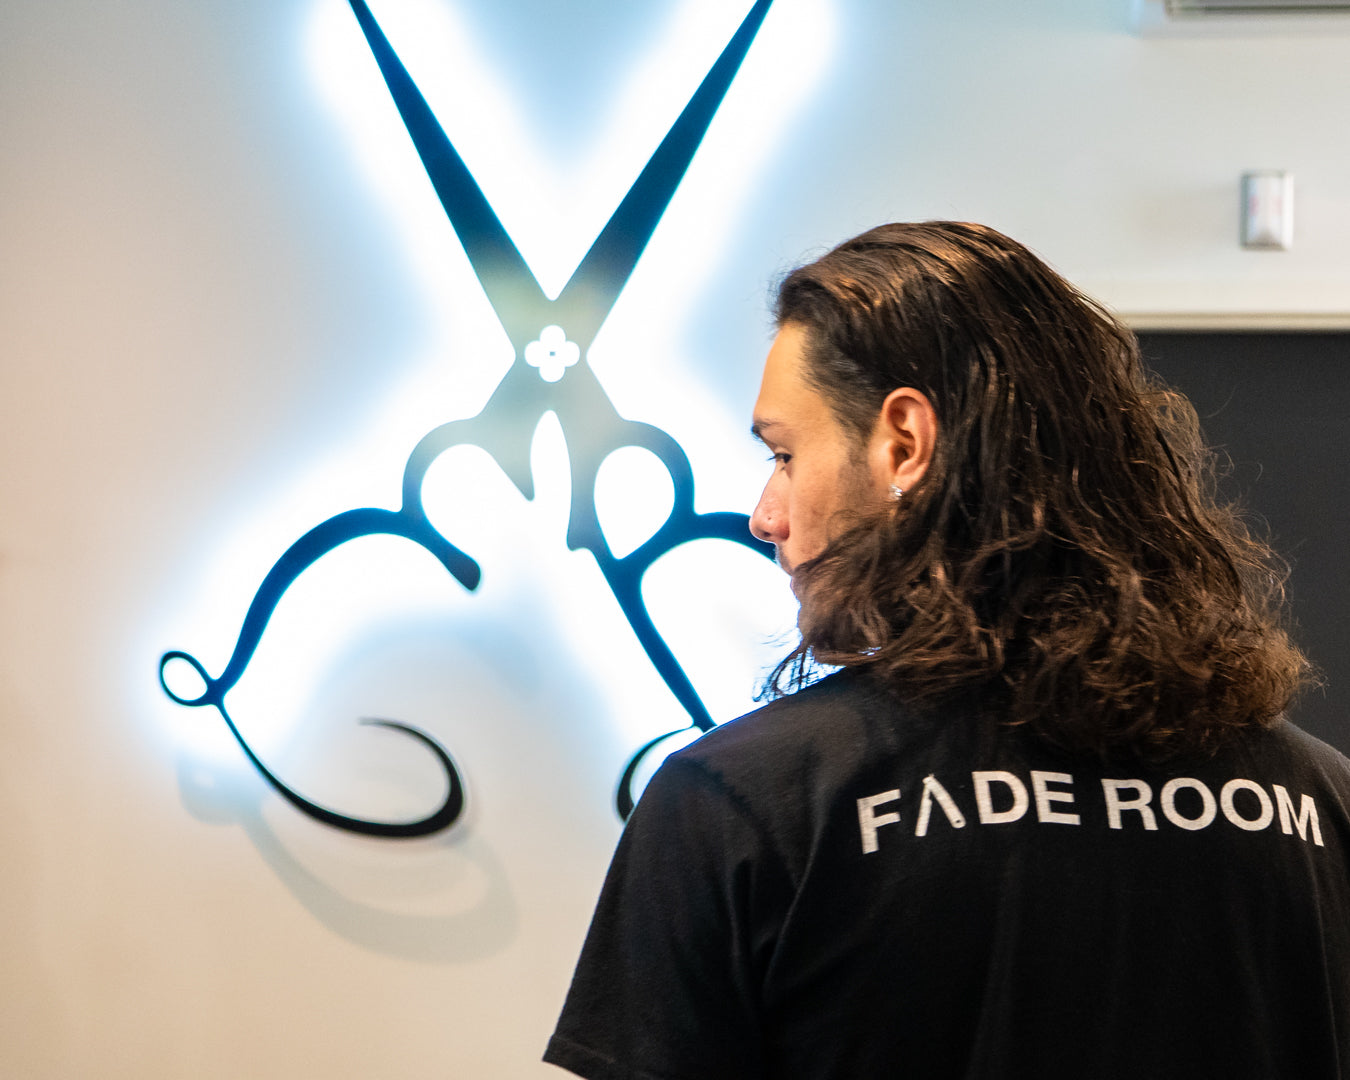 Men's hair donations. How long does your hair to be to donate? Fade Room Toronto